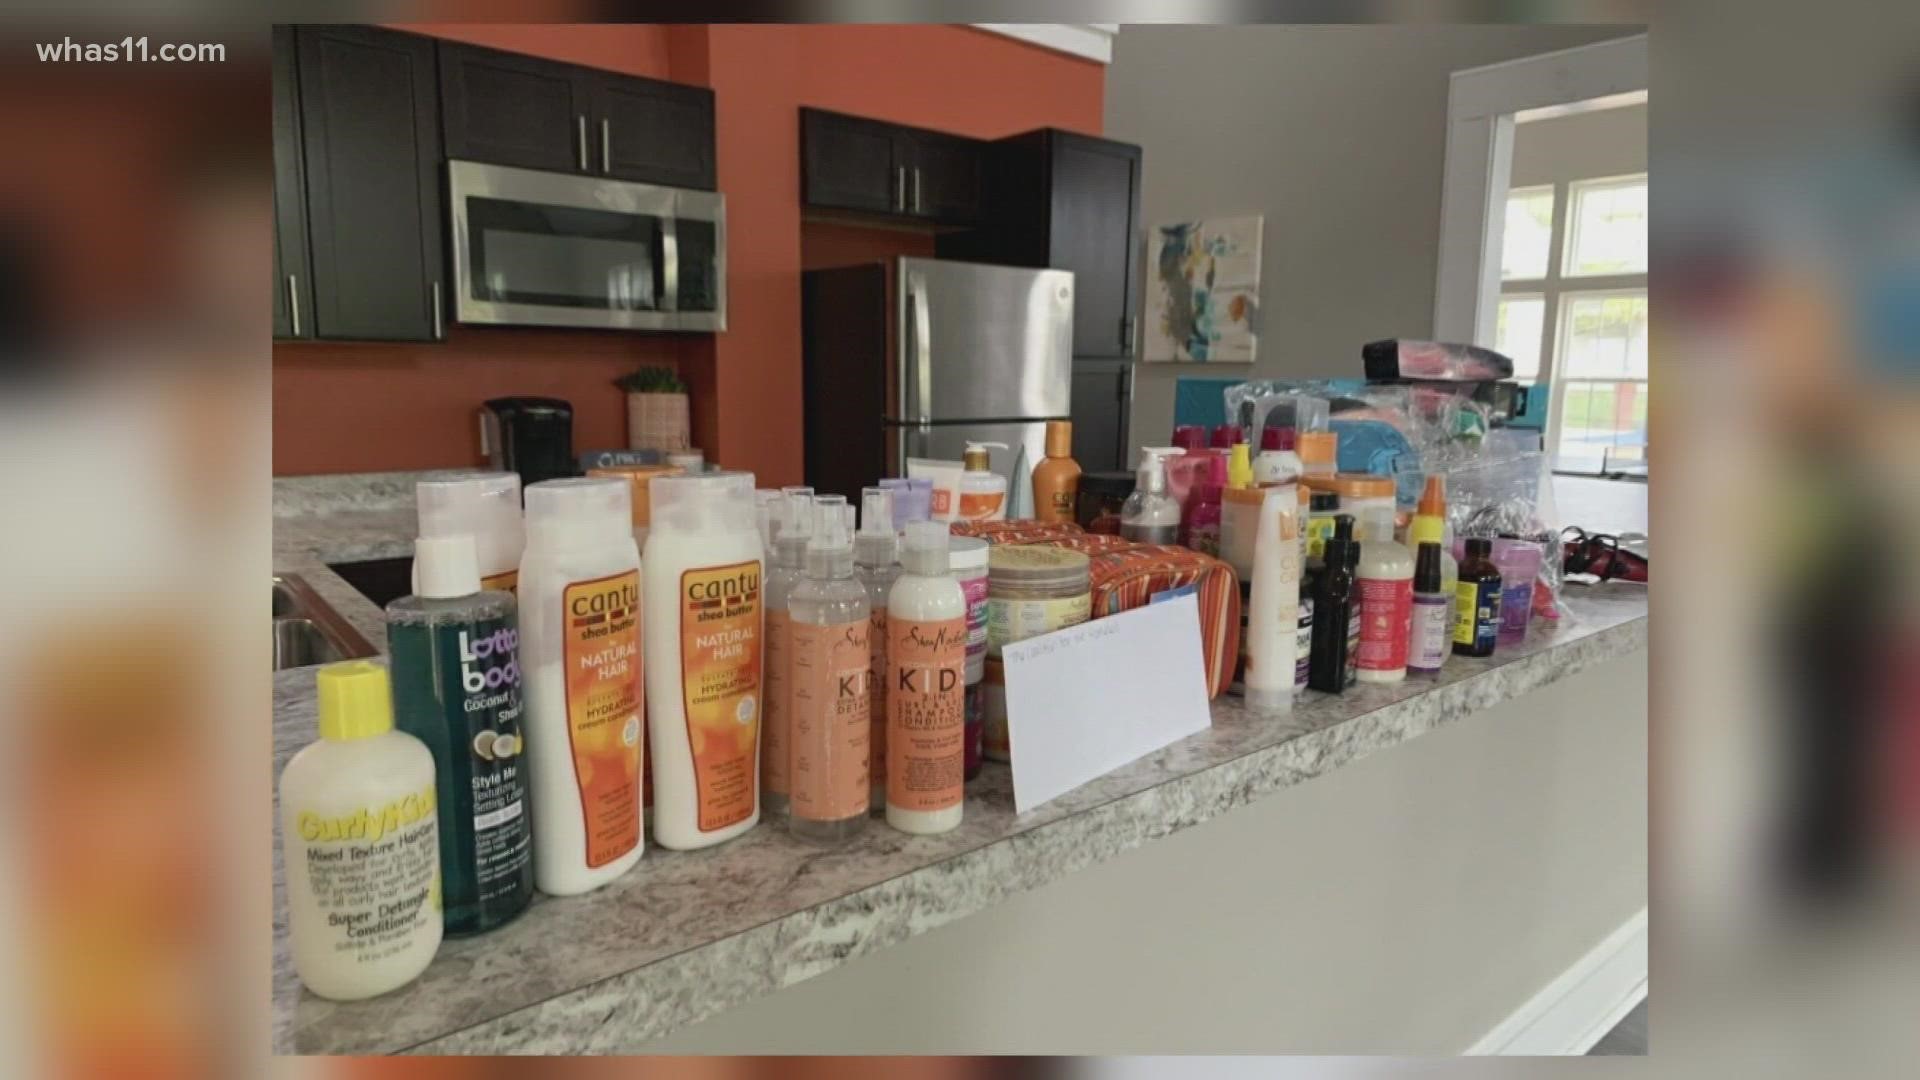 The Coalition for the Homeless recently began collecting hair care and hygiene products specifically for Black and Brown people who are homeless.